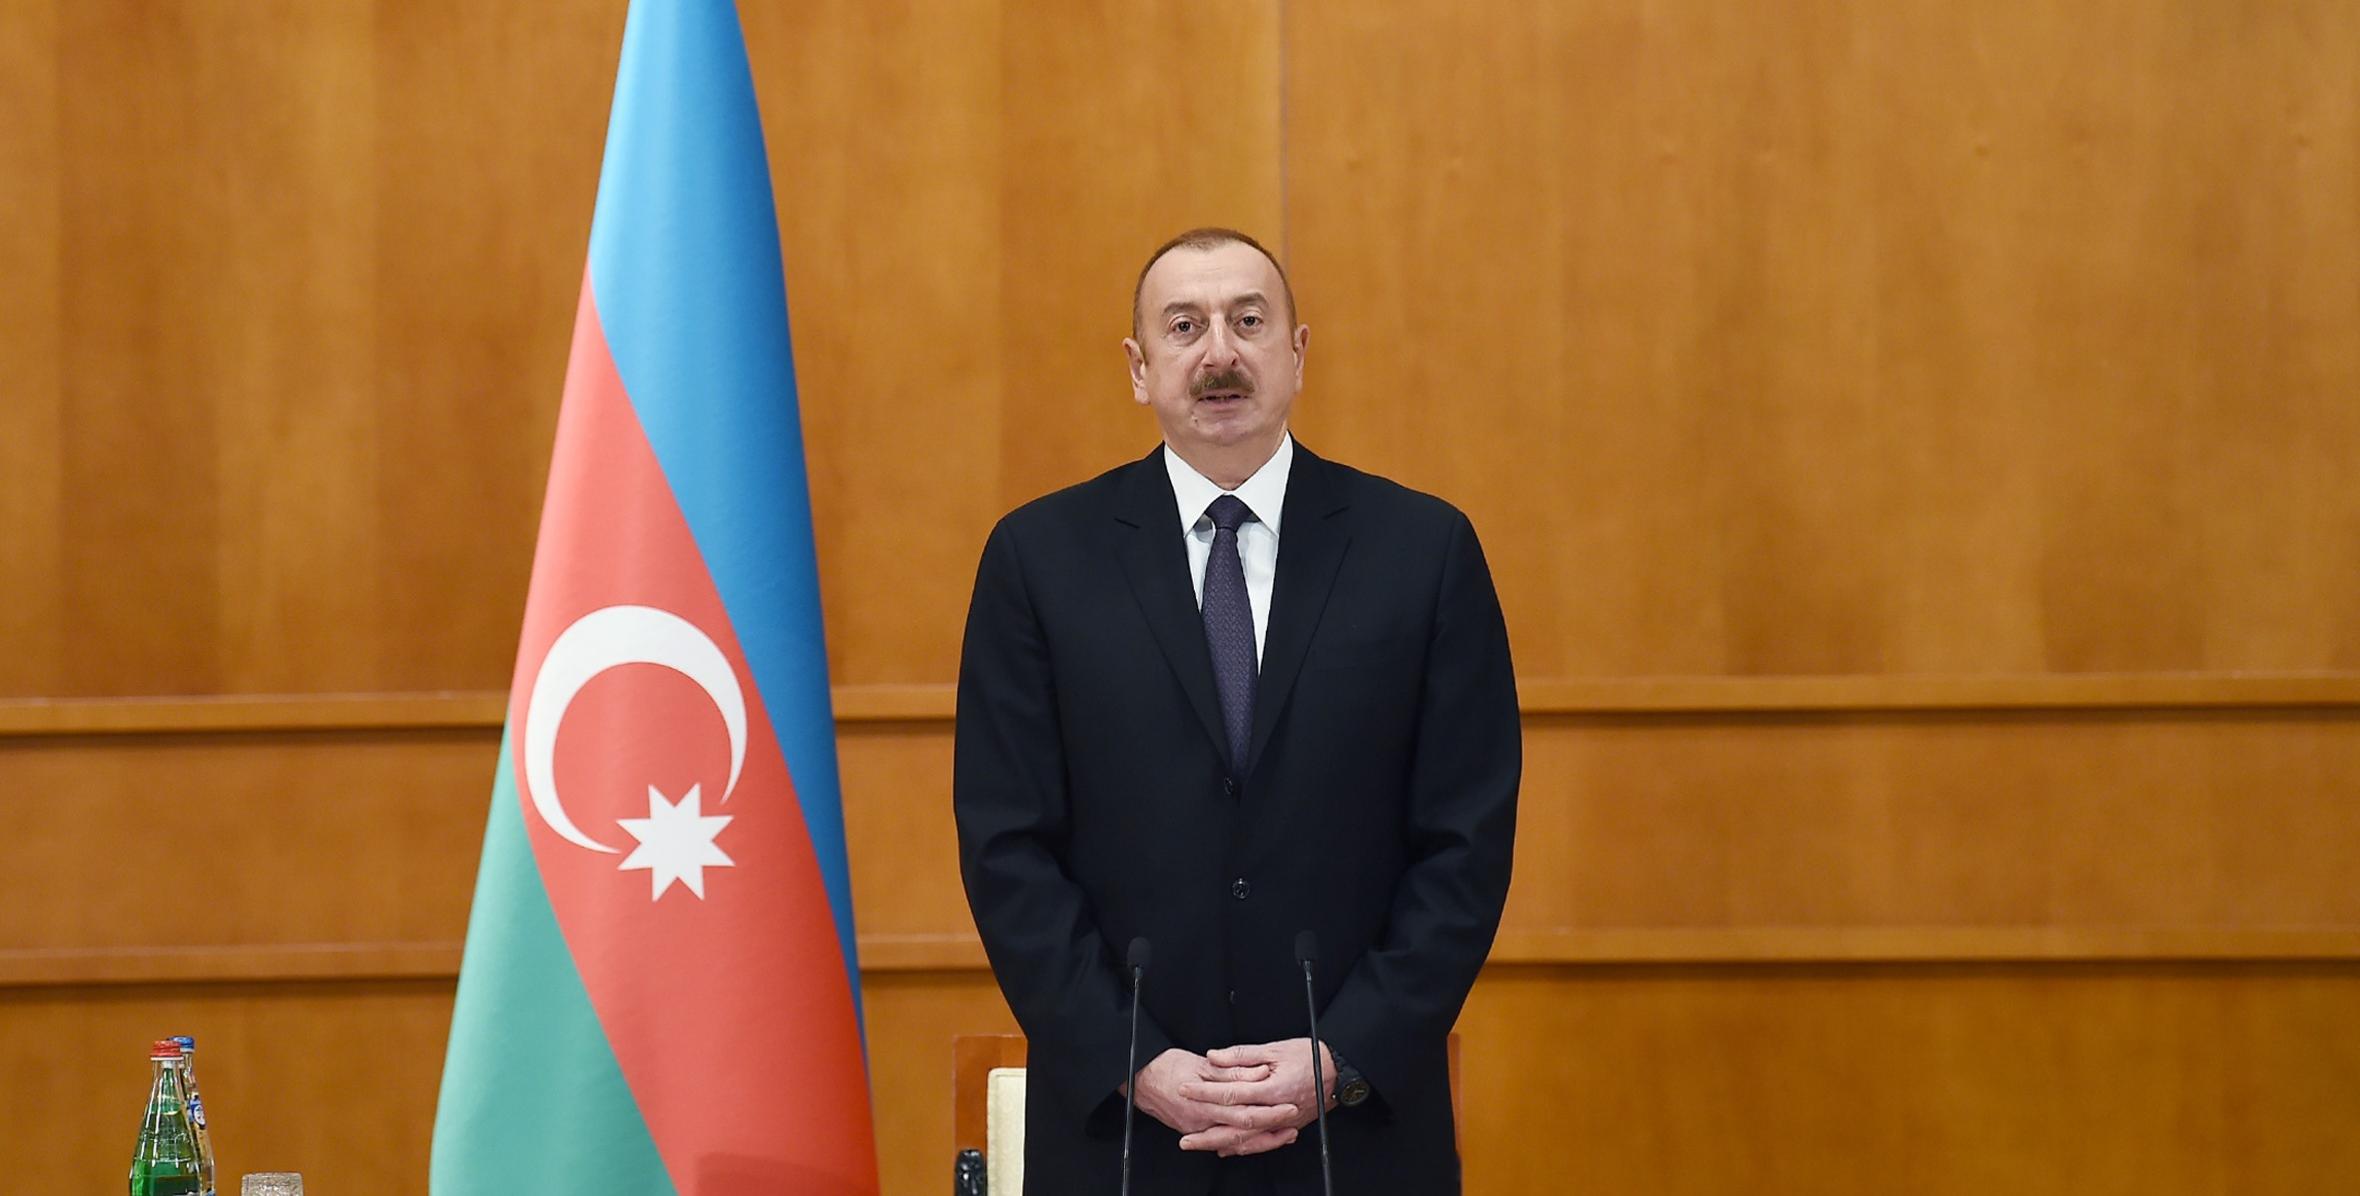 Speech by Ilham Aliyev at the meeting with martyr families